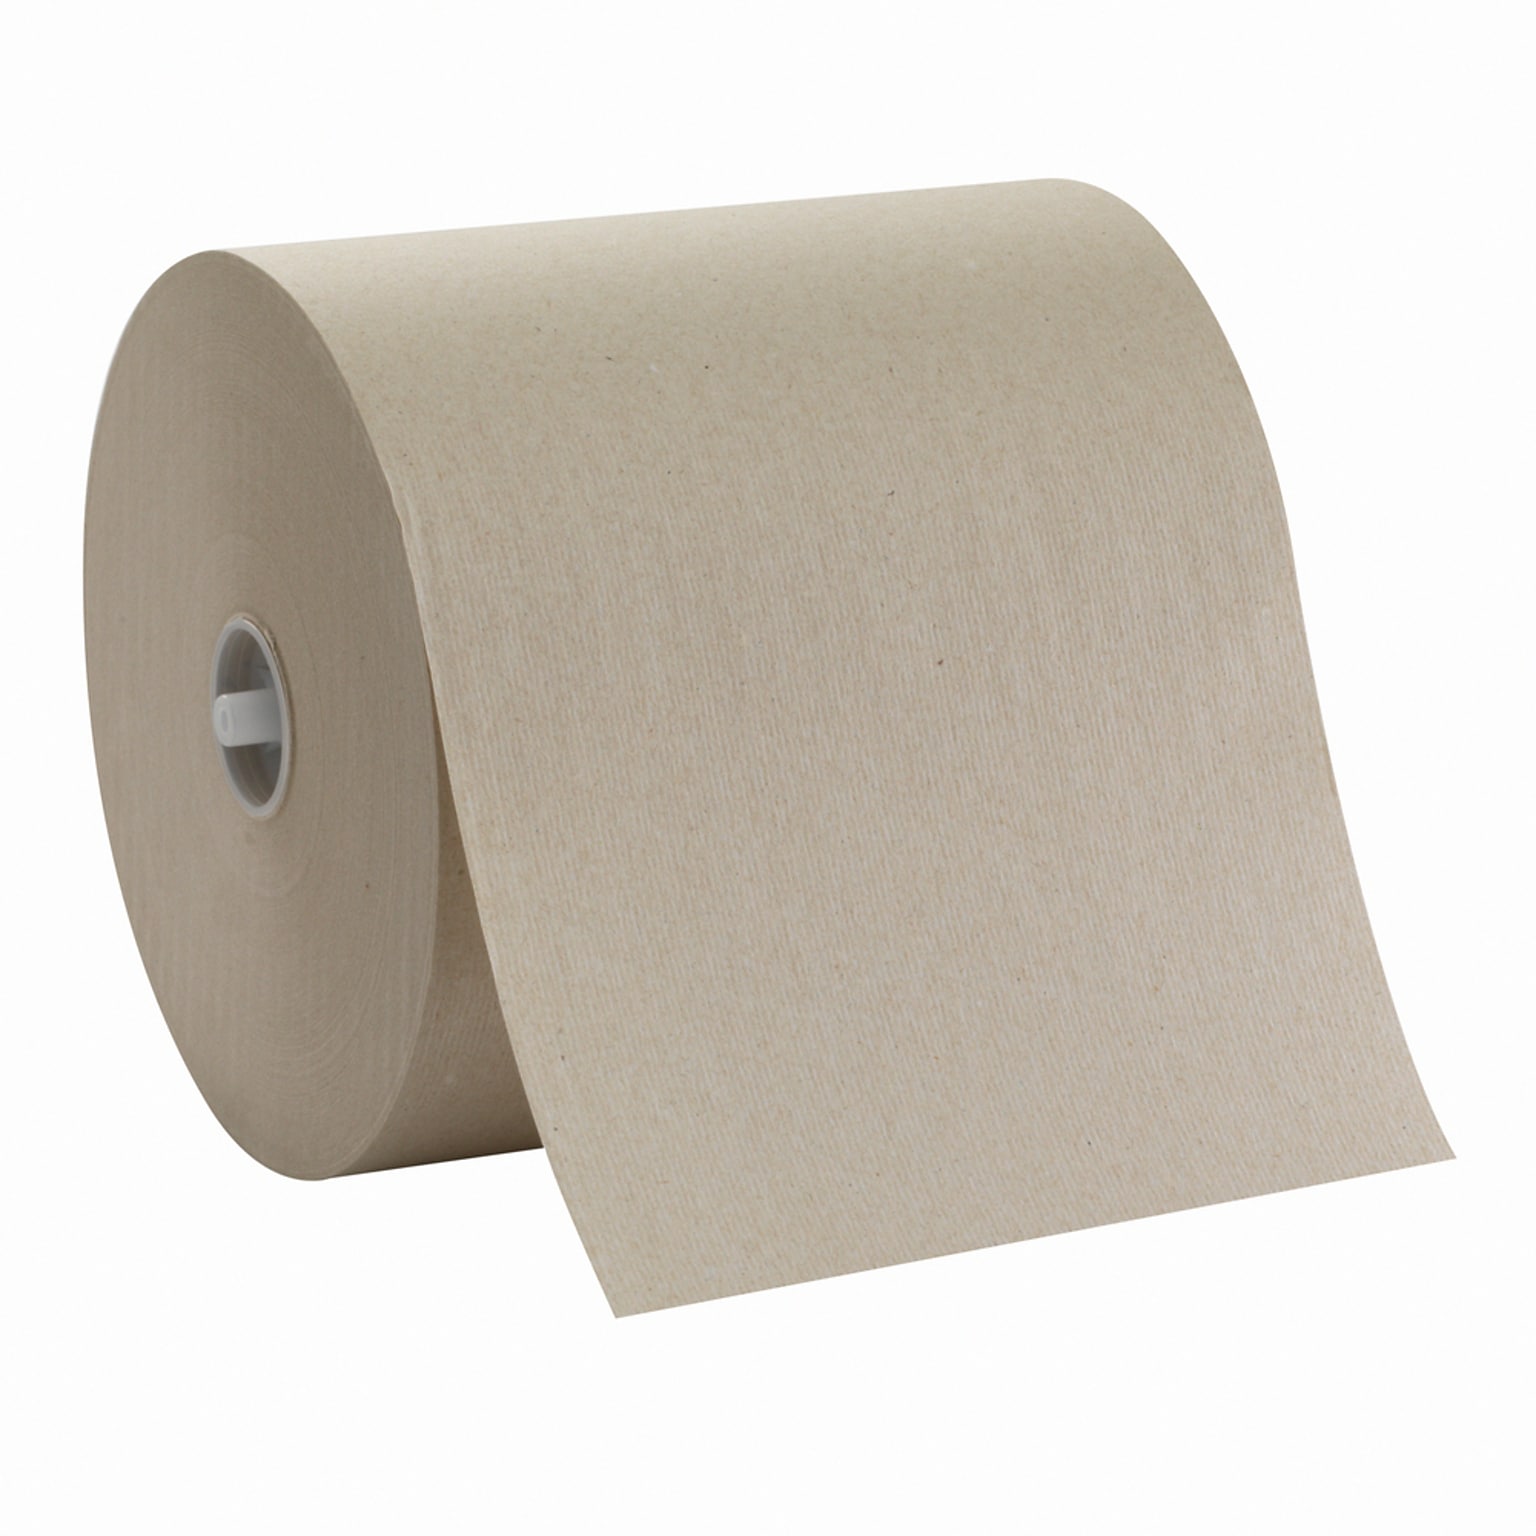 Georgia-Pacific Sofpull Recycled High-Capacity Hardwound Paper Towel, 1-Ply, Natural, 1000/Roll, 6 Rolls/Carton (26480)